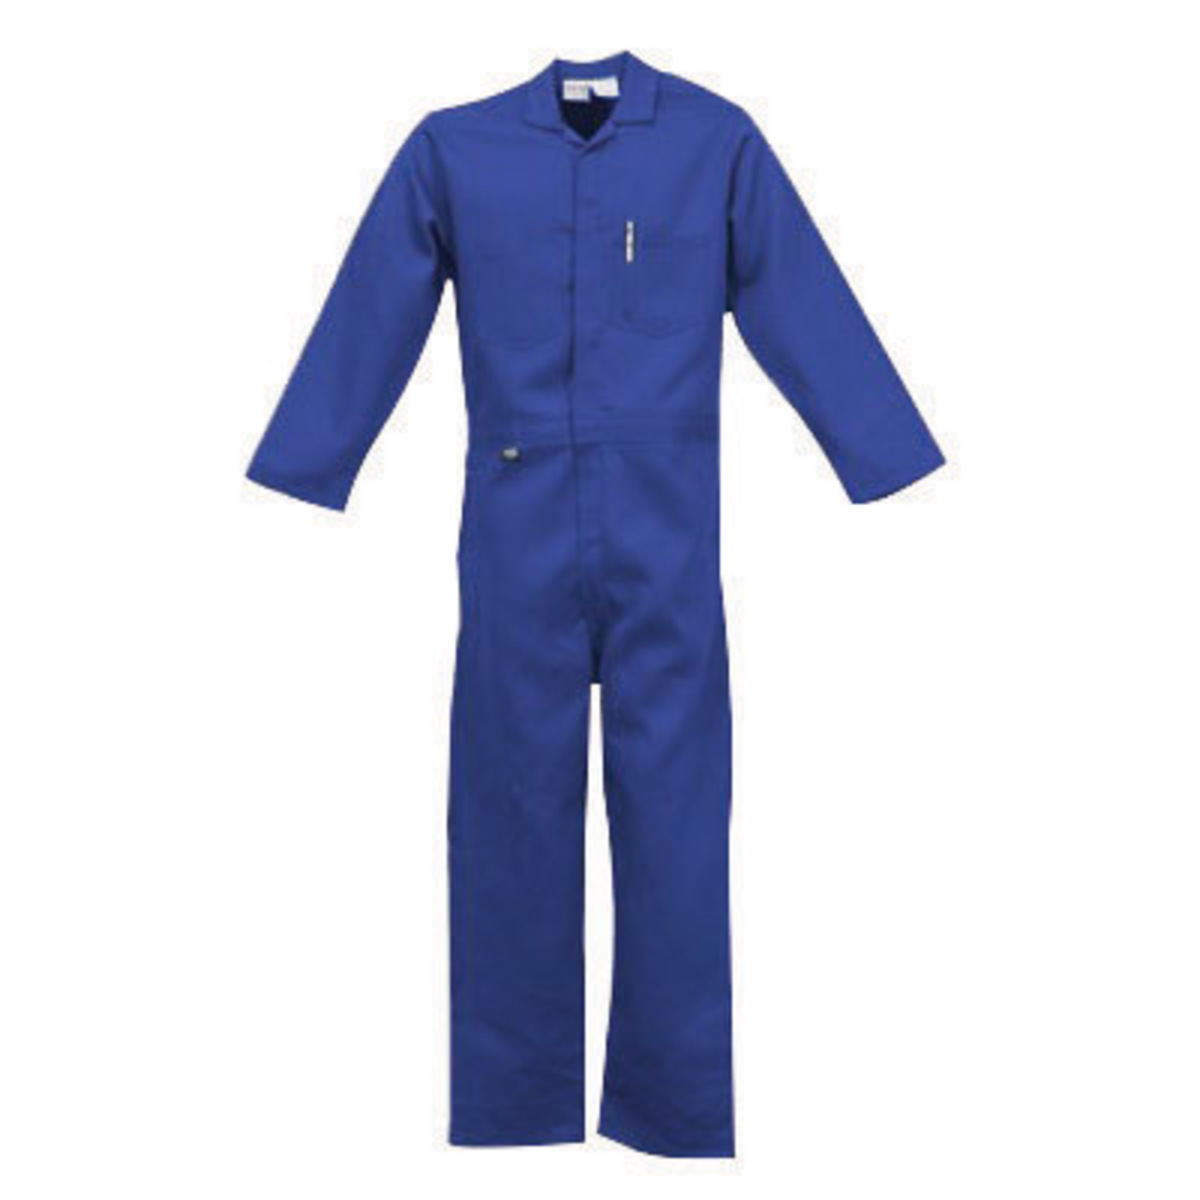 Stanco Safety Products™ 5X X-Tall Navy Blue Nomex® IIIA Arc Rated Flame Resistant Coveralls With Front Zipper Closure And 1 (4.8